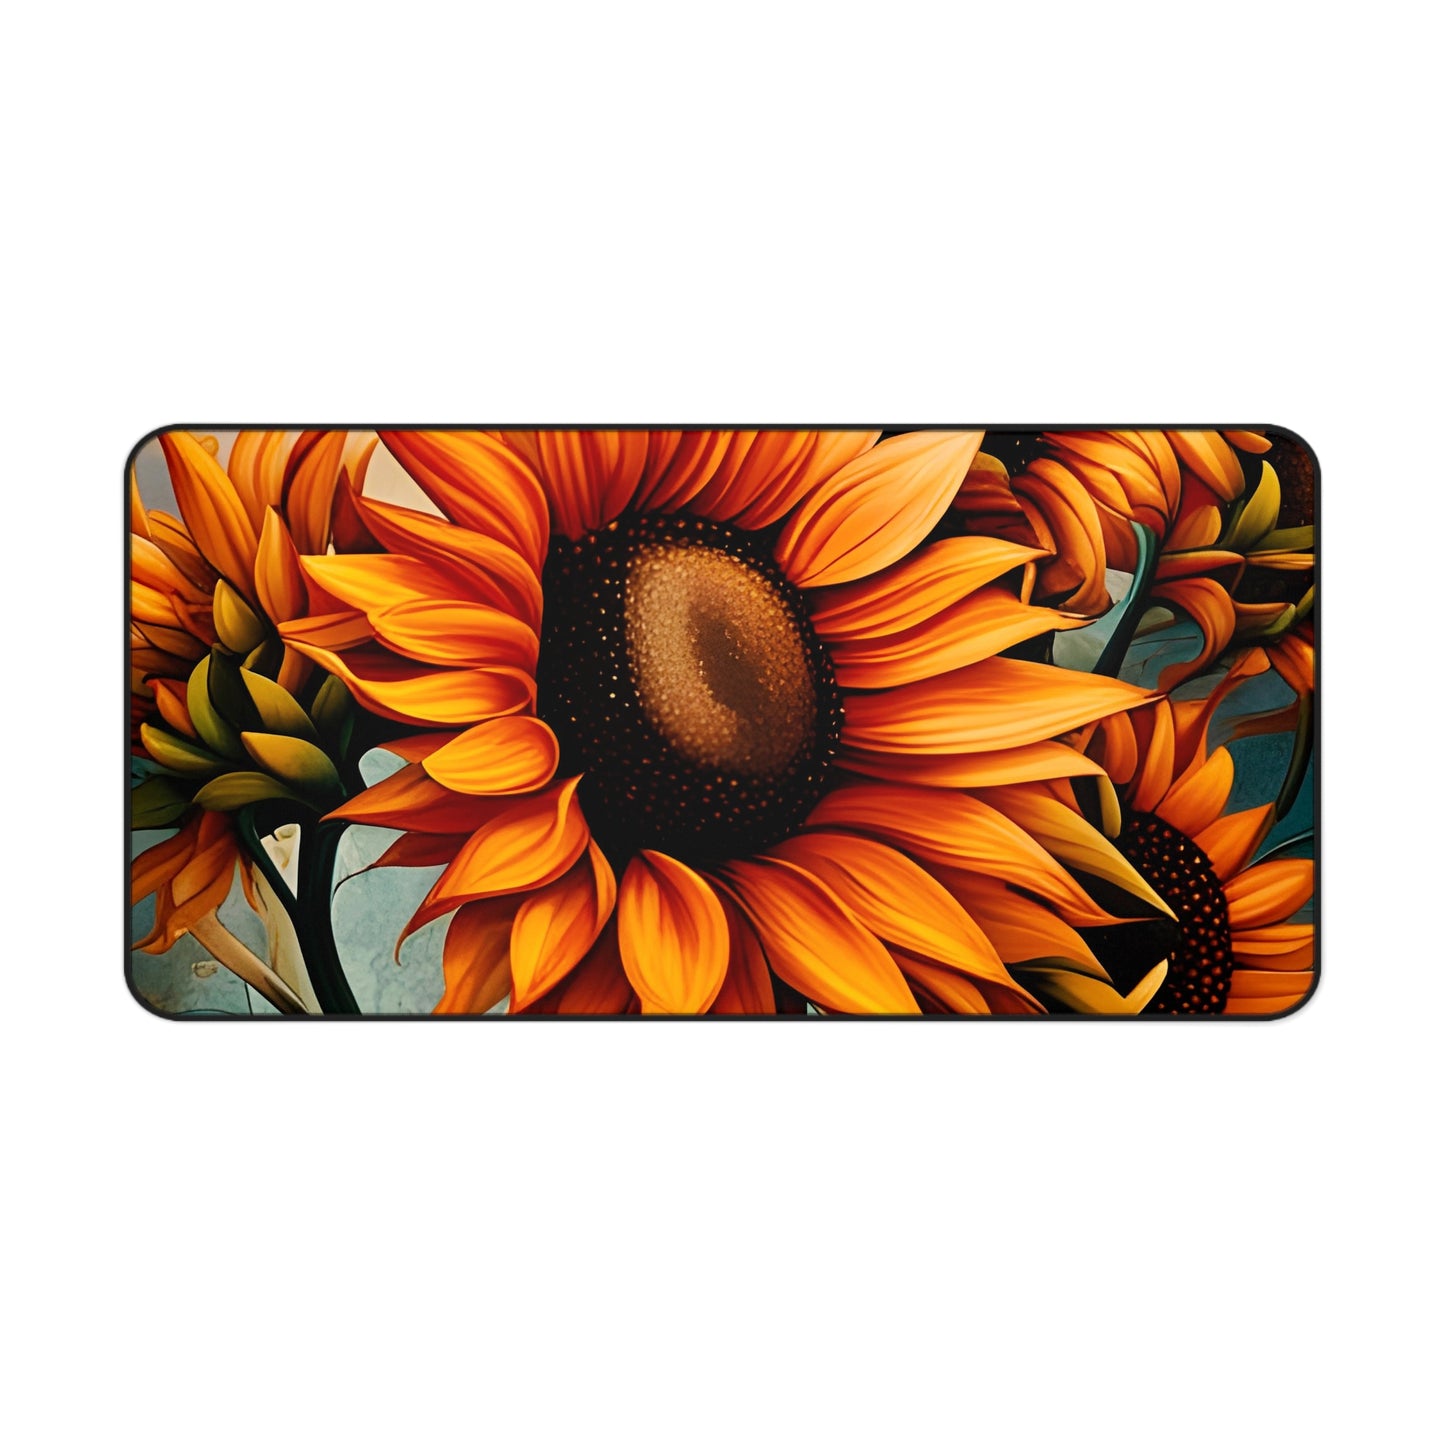 Sunflower Crop on Distressed Blue and Copper Background Printed on Desk mat 15x31